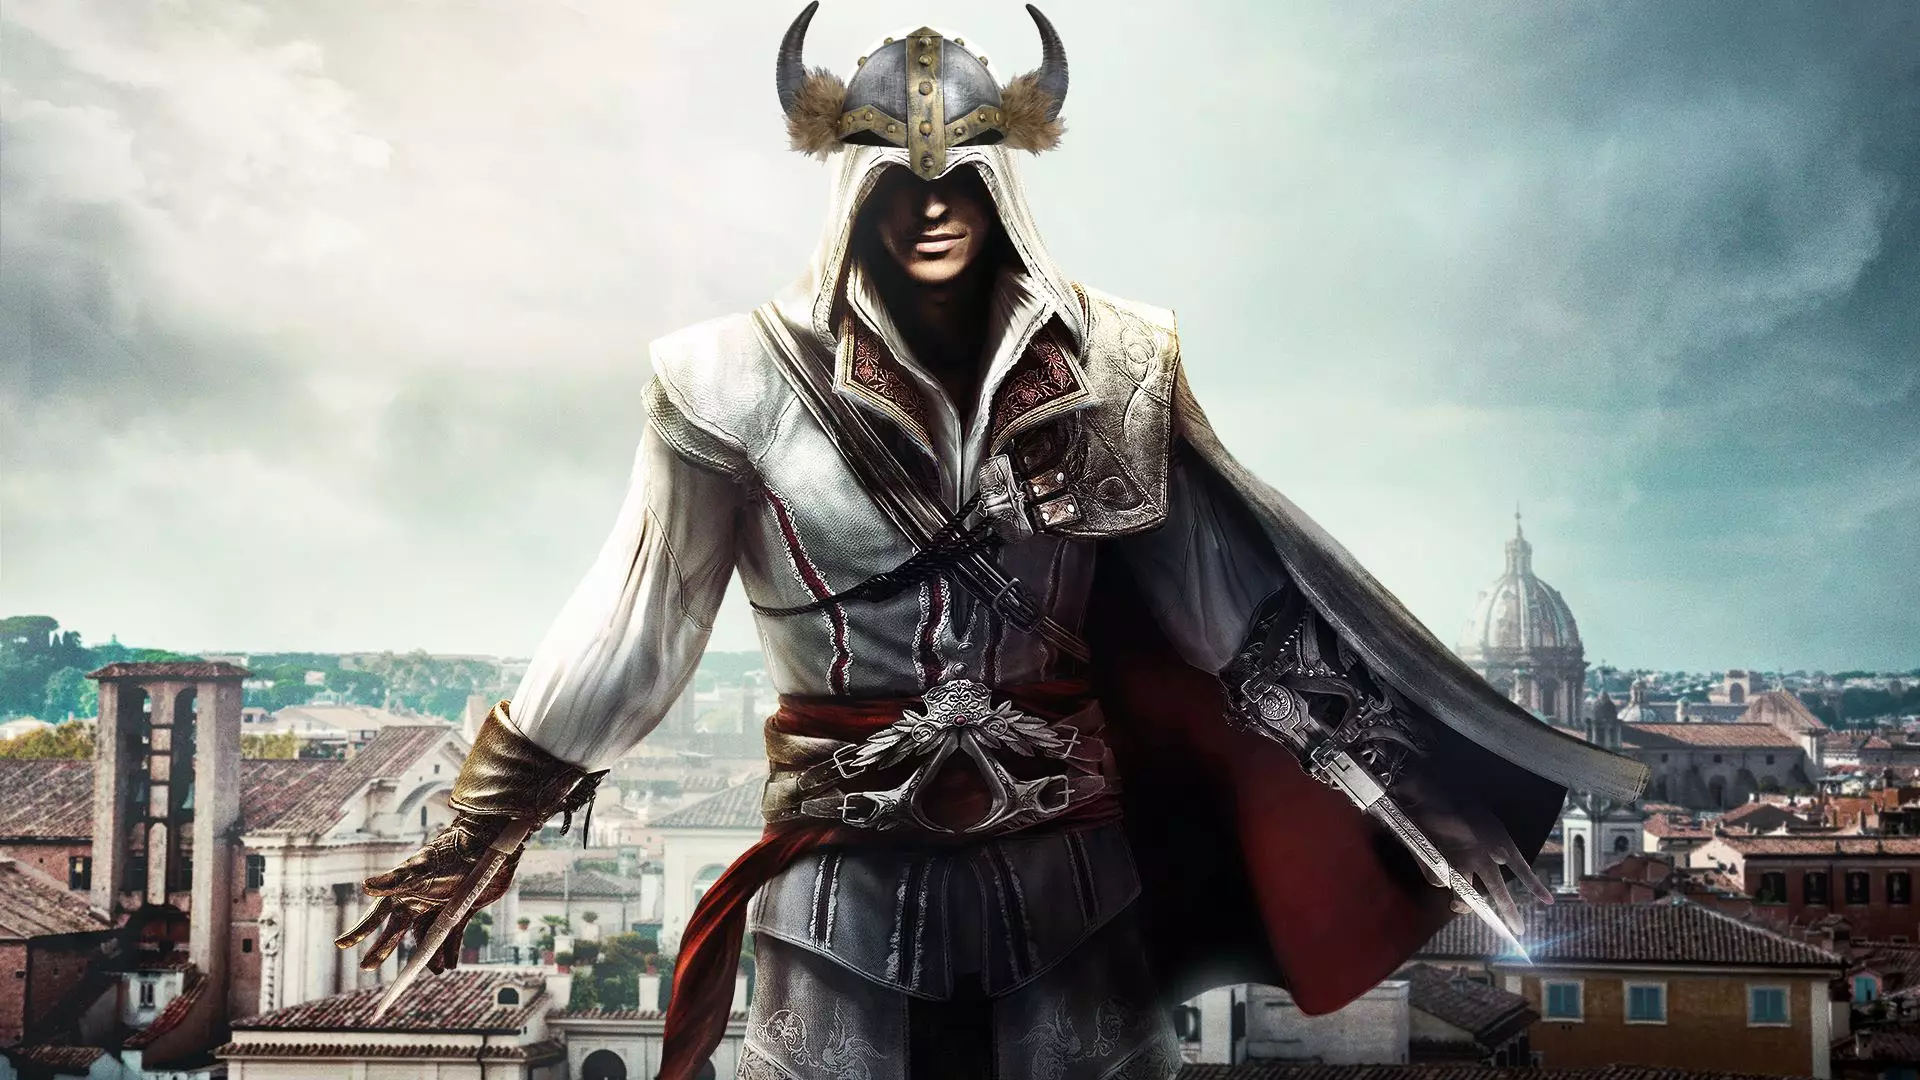 Assassin's Creed rumours point to a Viking game next